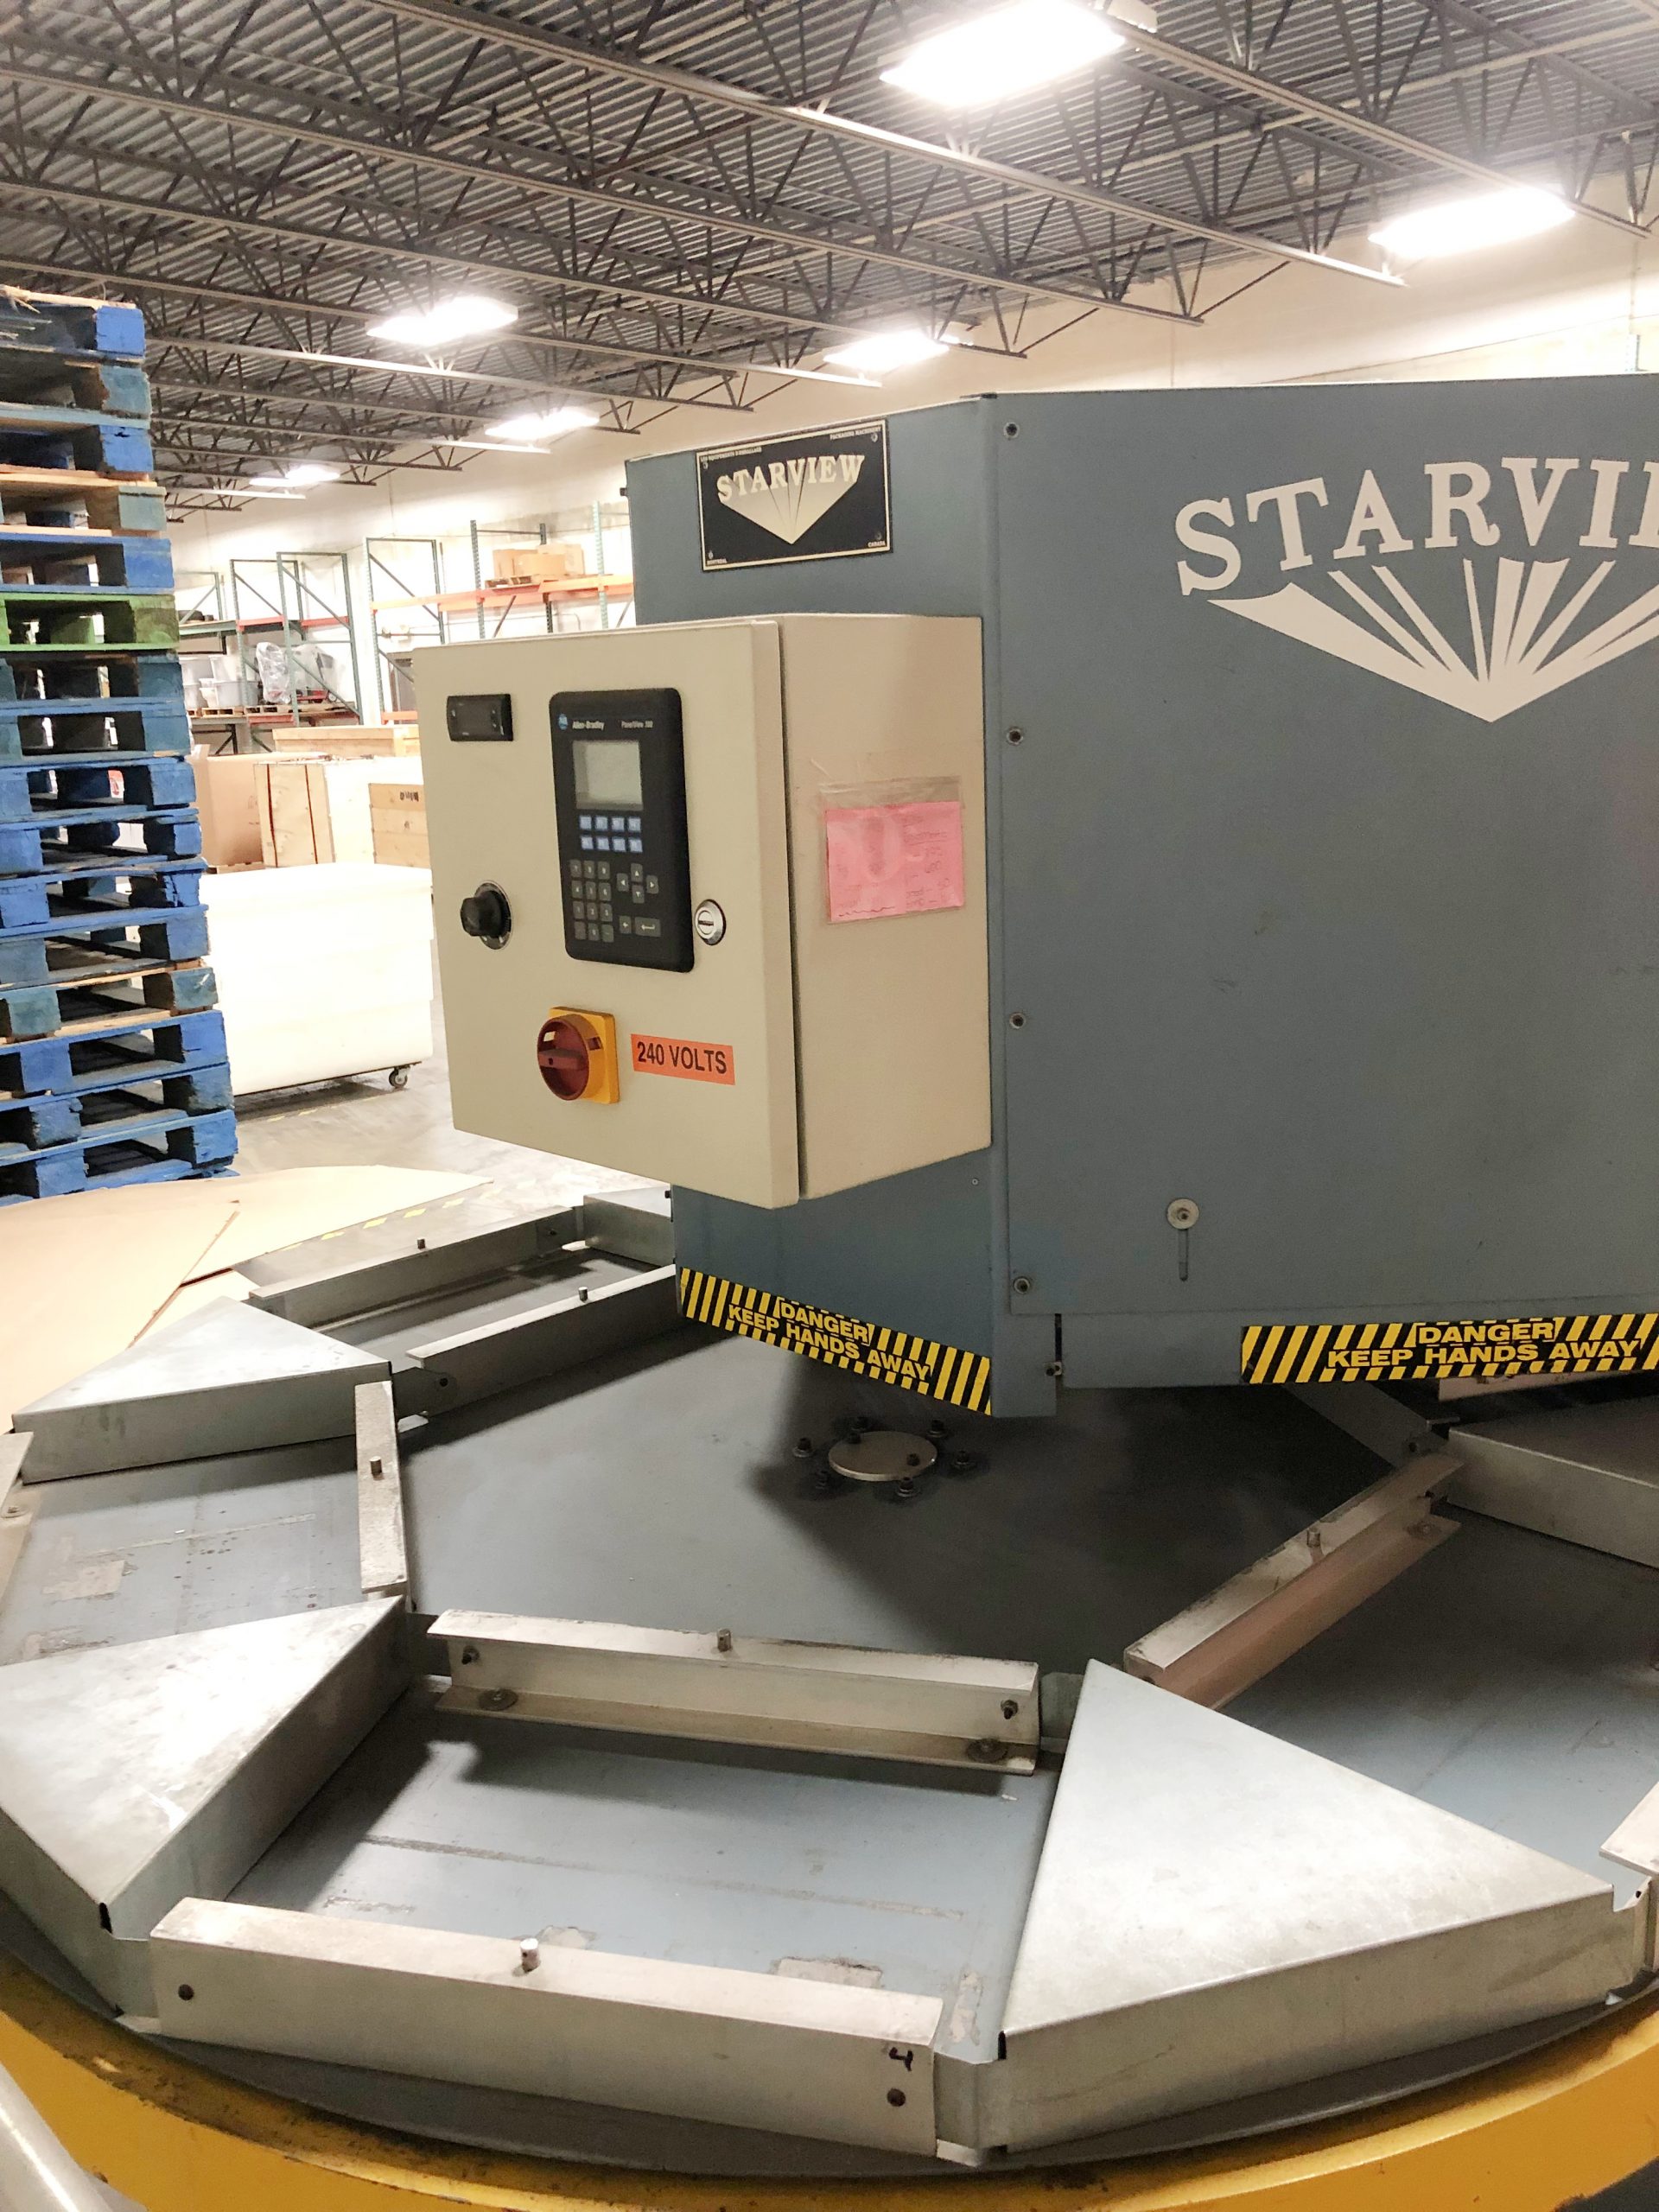 Equipment Lot: Stairview Clamshell Machine, Beseler Packaging Machine, Besler Shrink Tunnel & Supplies (used) Item # UE-011222E (Wisconsin)